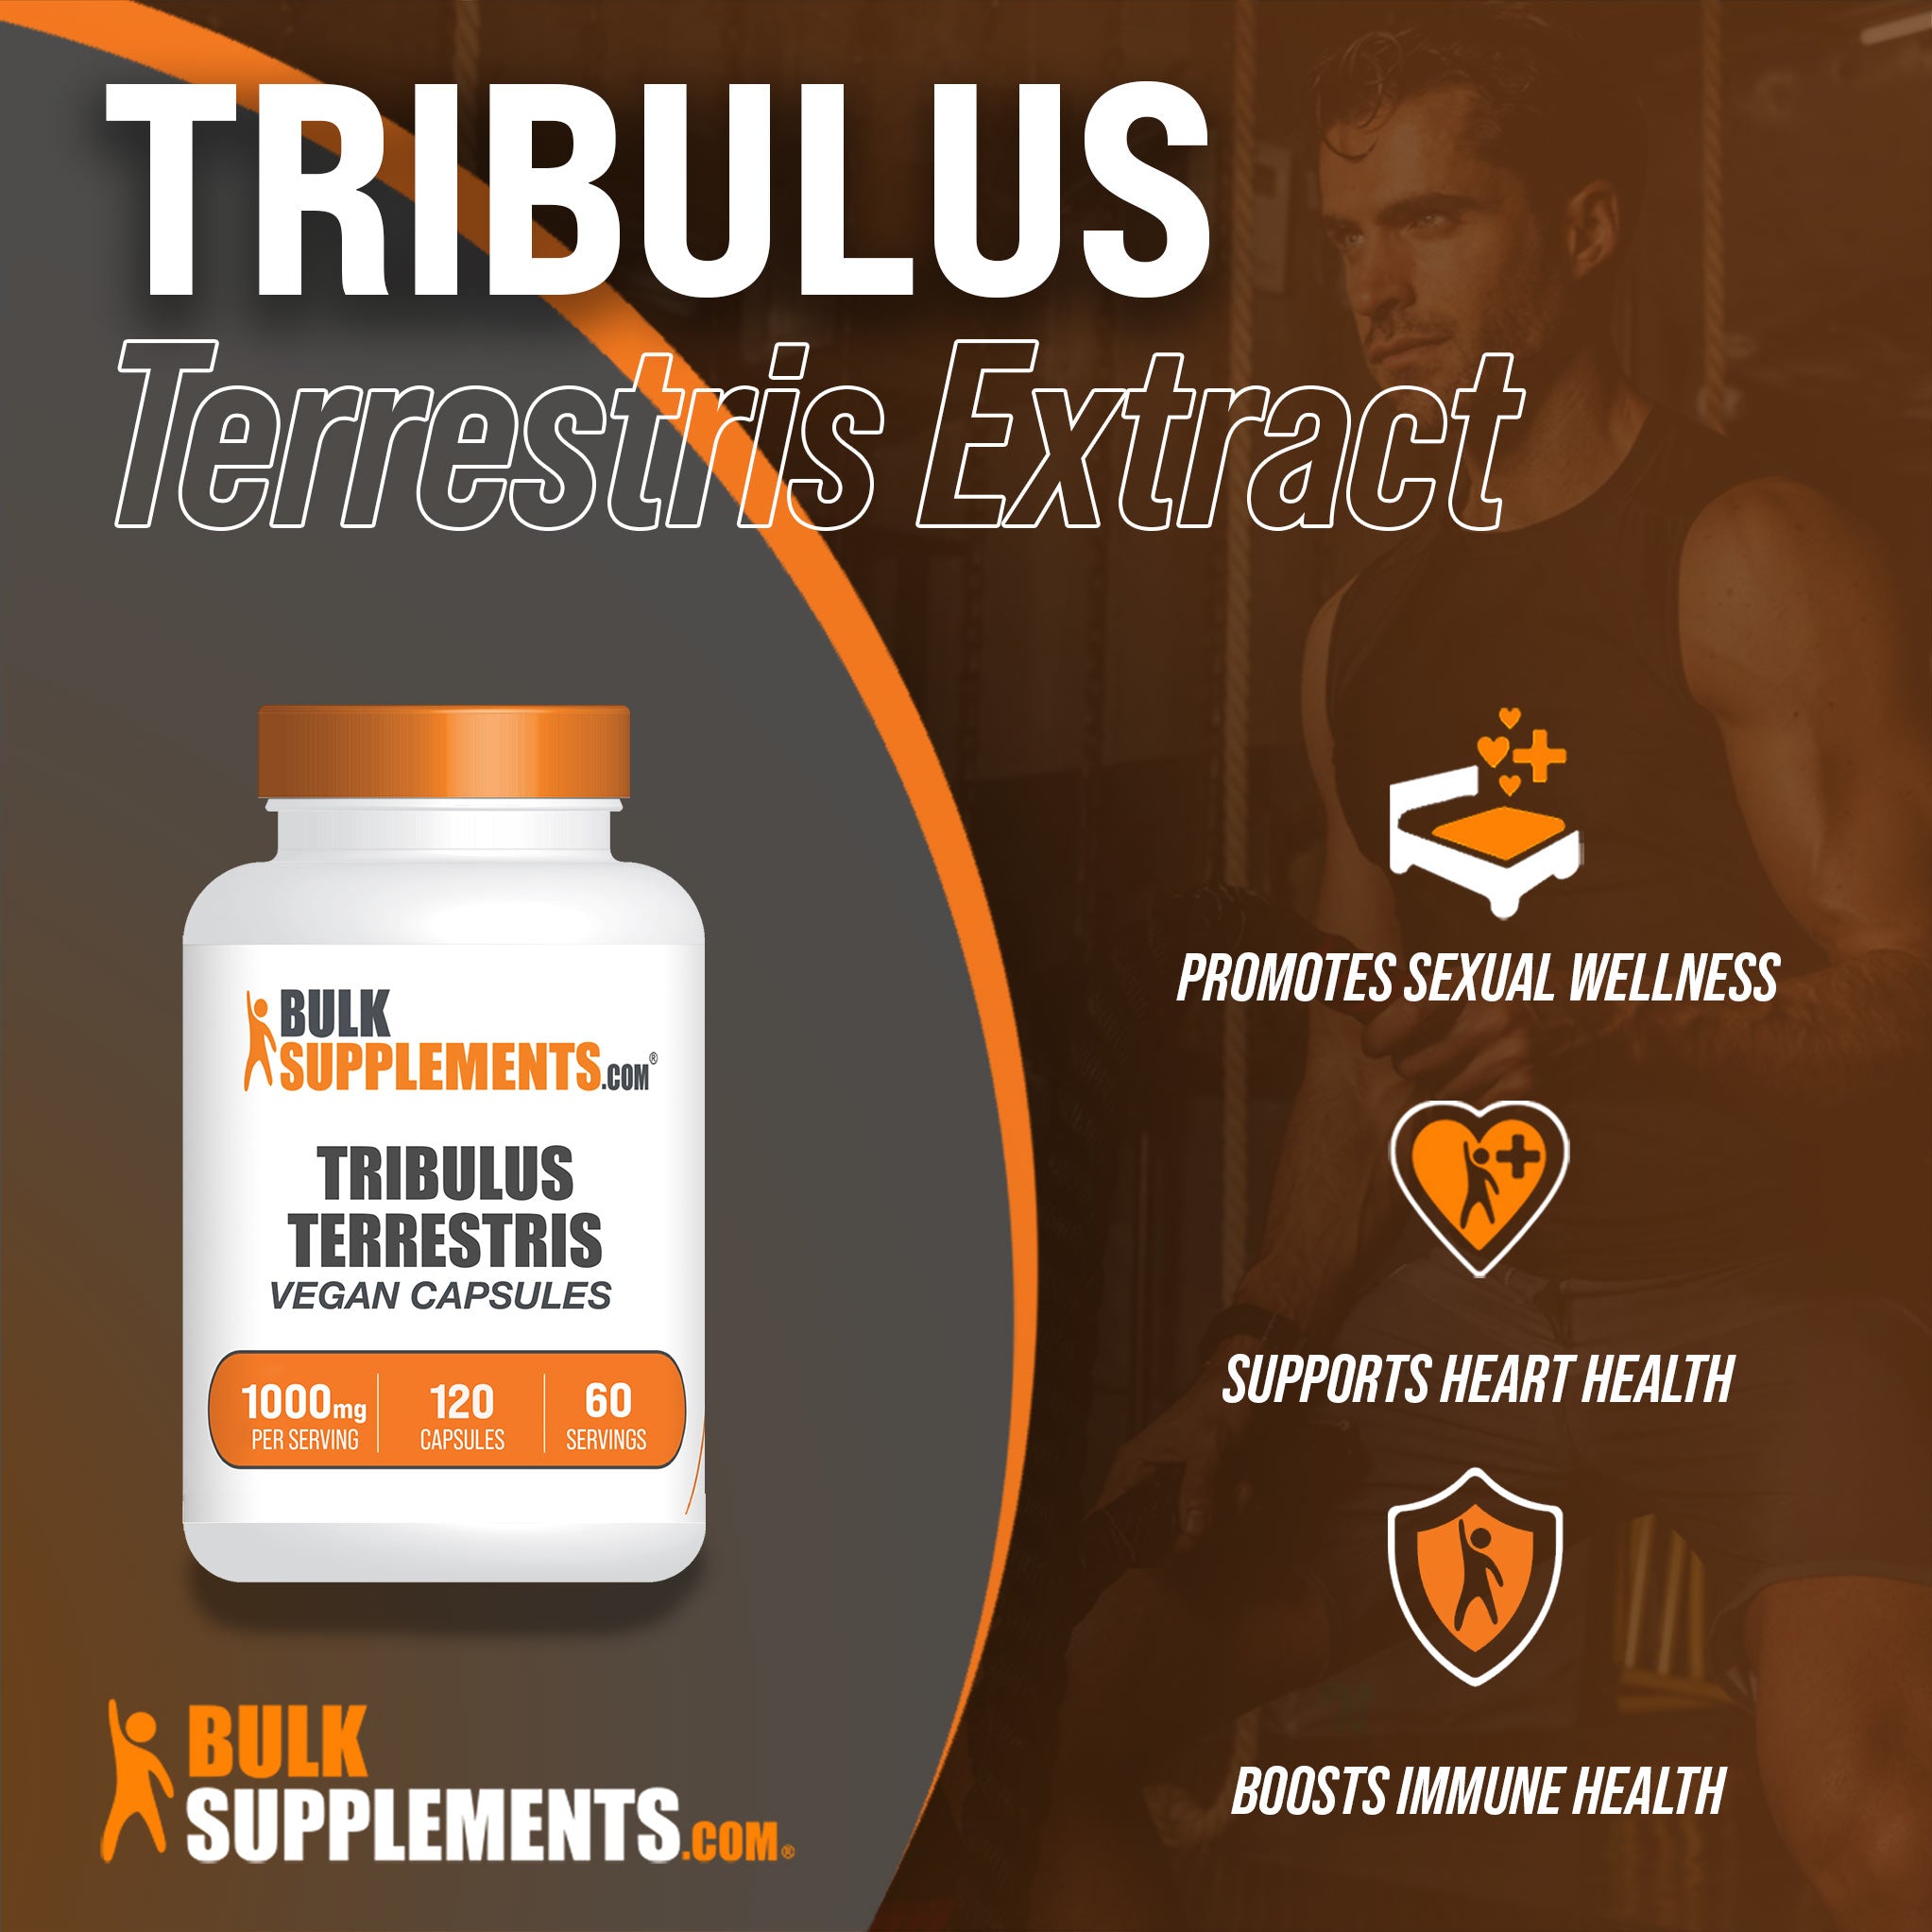 Benefits of Tribulus Terrestris Extract: promotes sexual wellness, supports heart health, boosts immune health